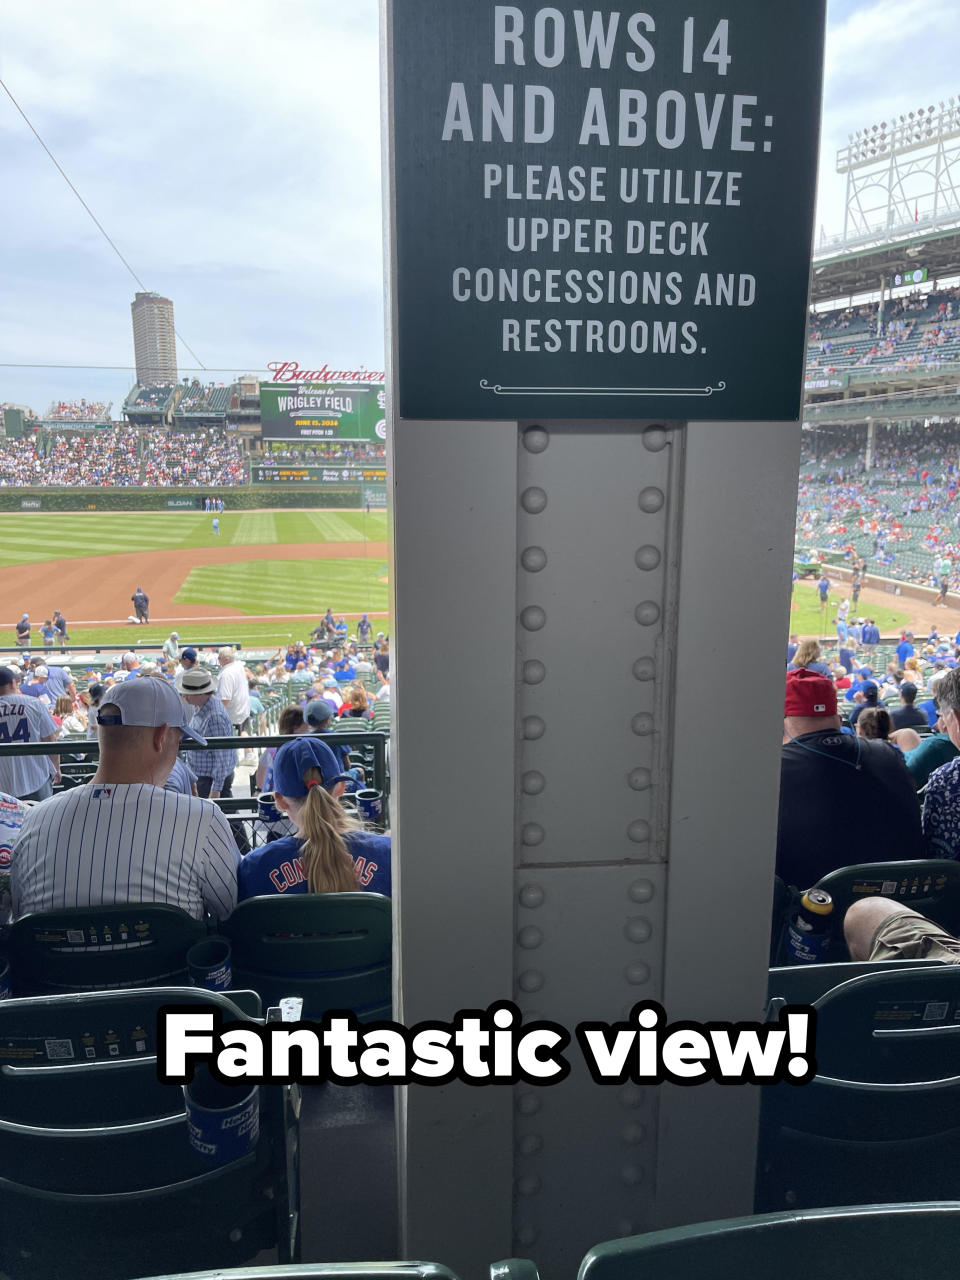 A sign at a baseball game says, "Rows 14 and above: Please utilize upper deck concessions and restrooms." Fans are seated in the stadium, and the game is ongoing